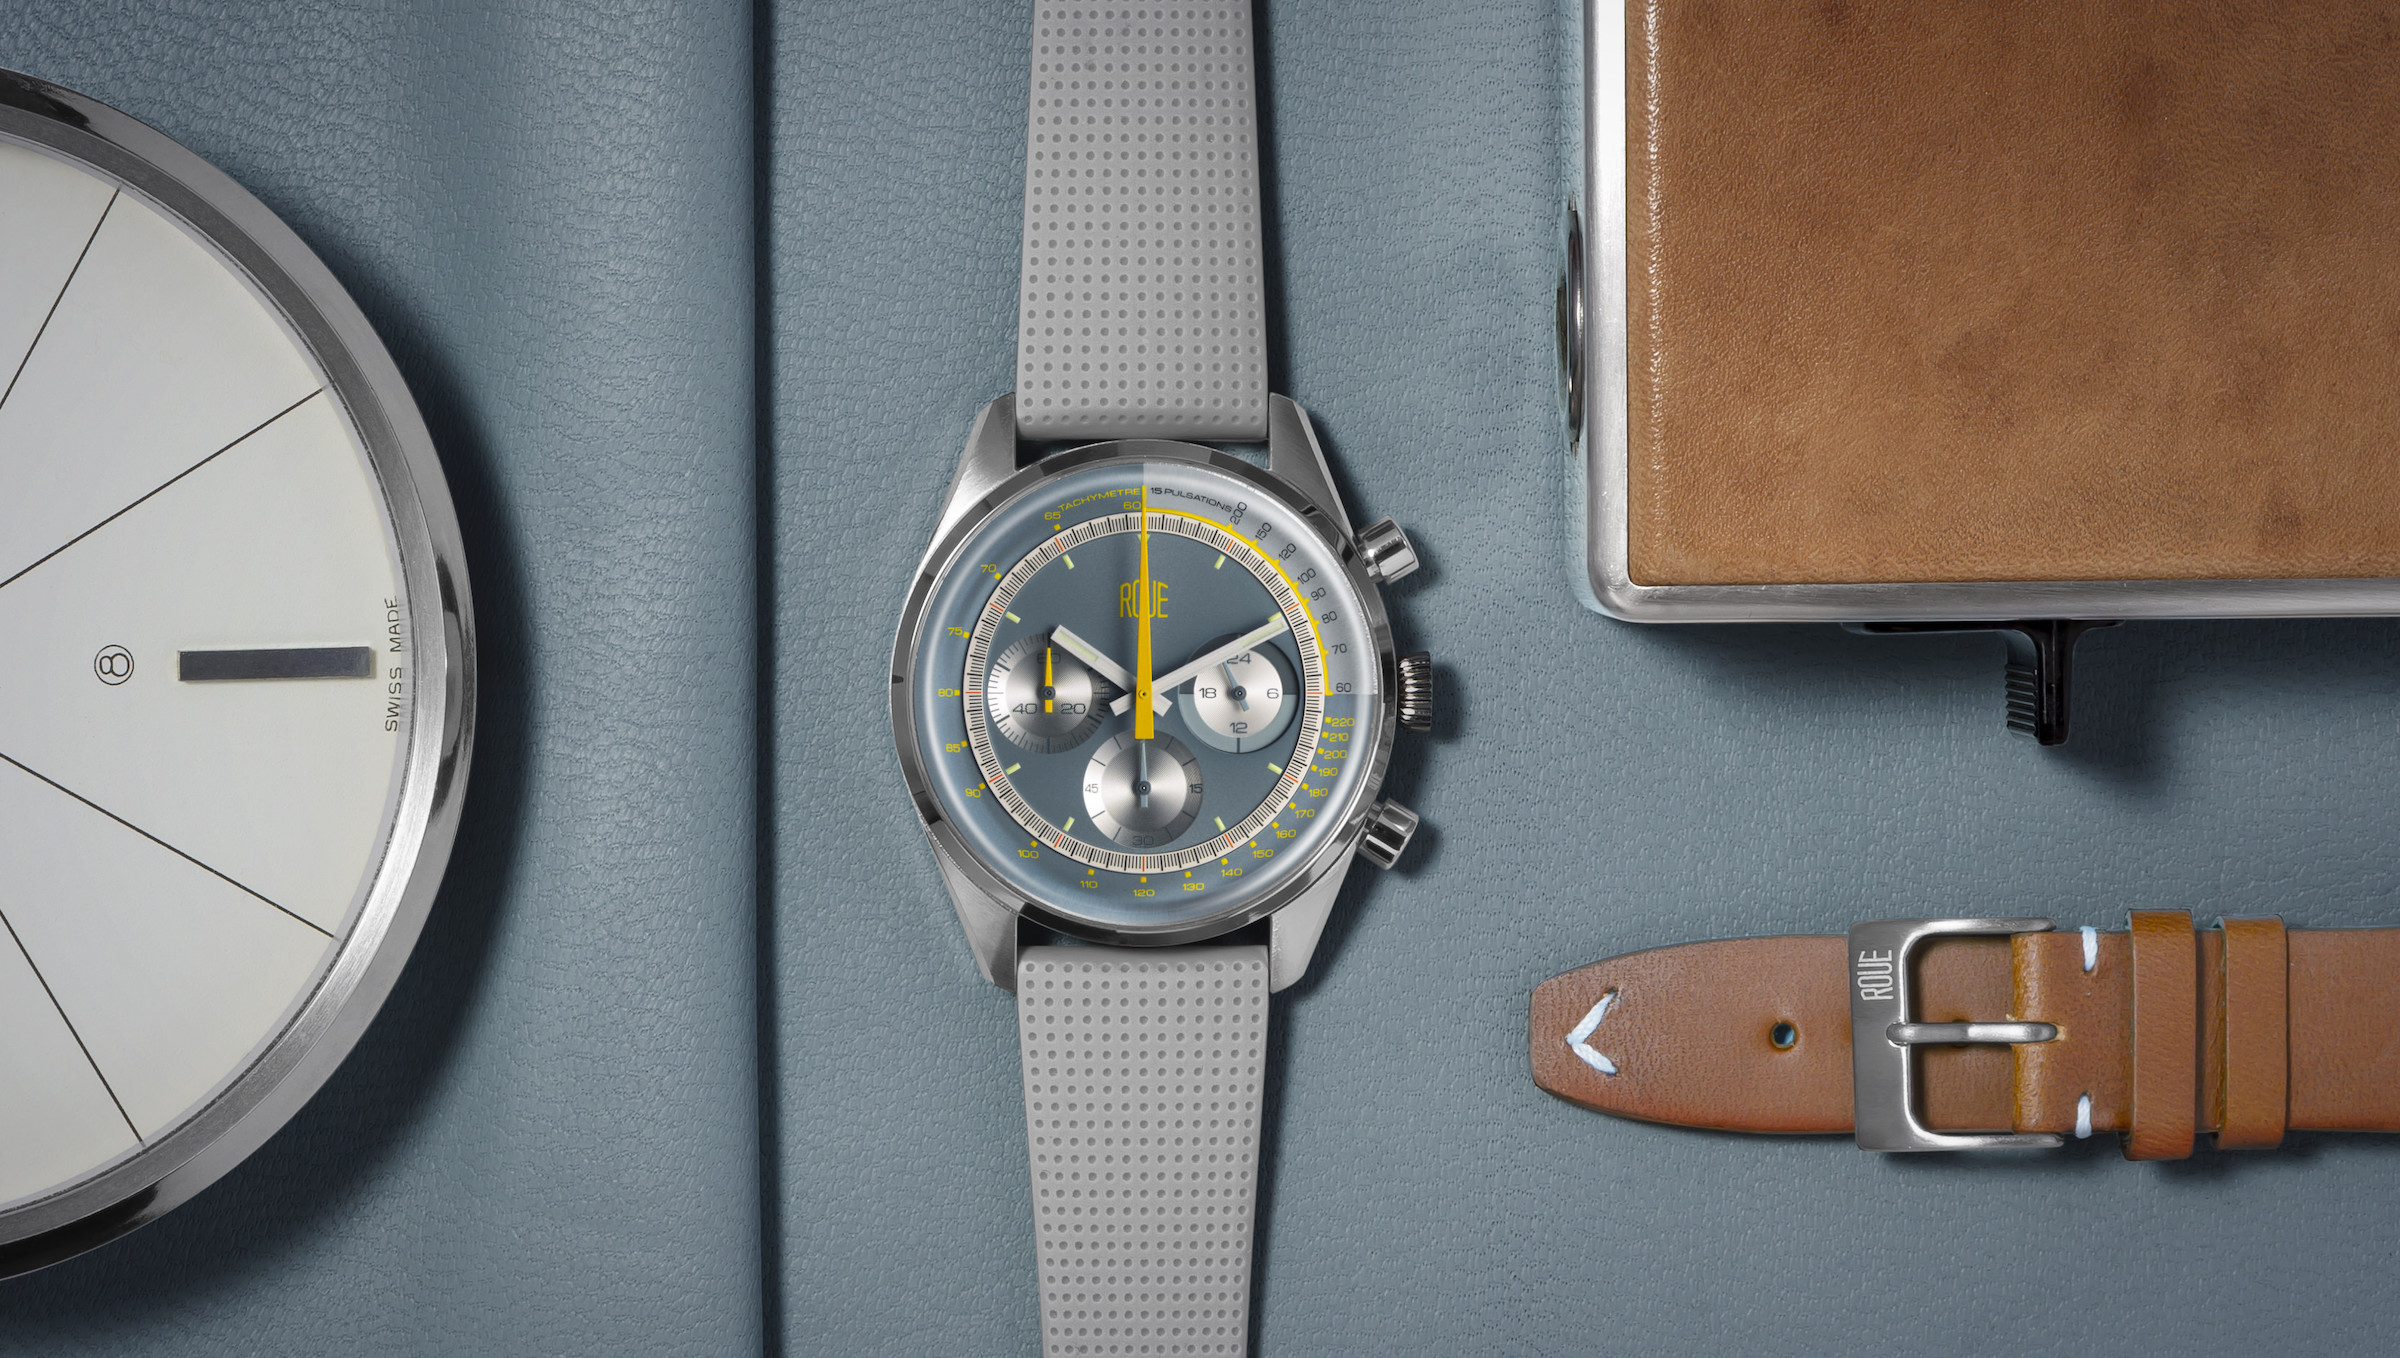 The Roue TPS - A New Racing Chronograph For $290 USD